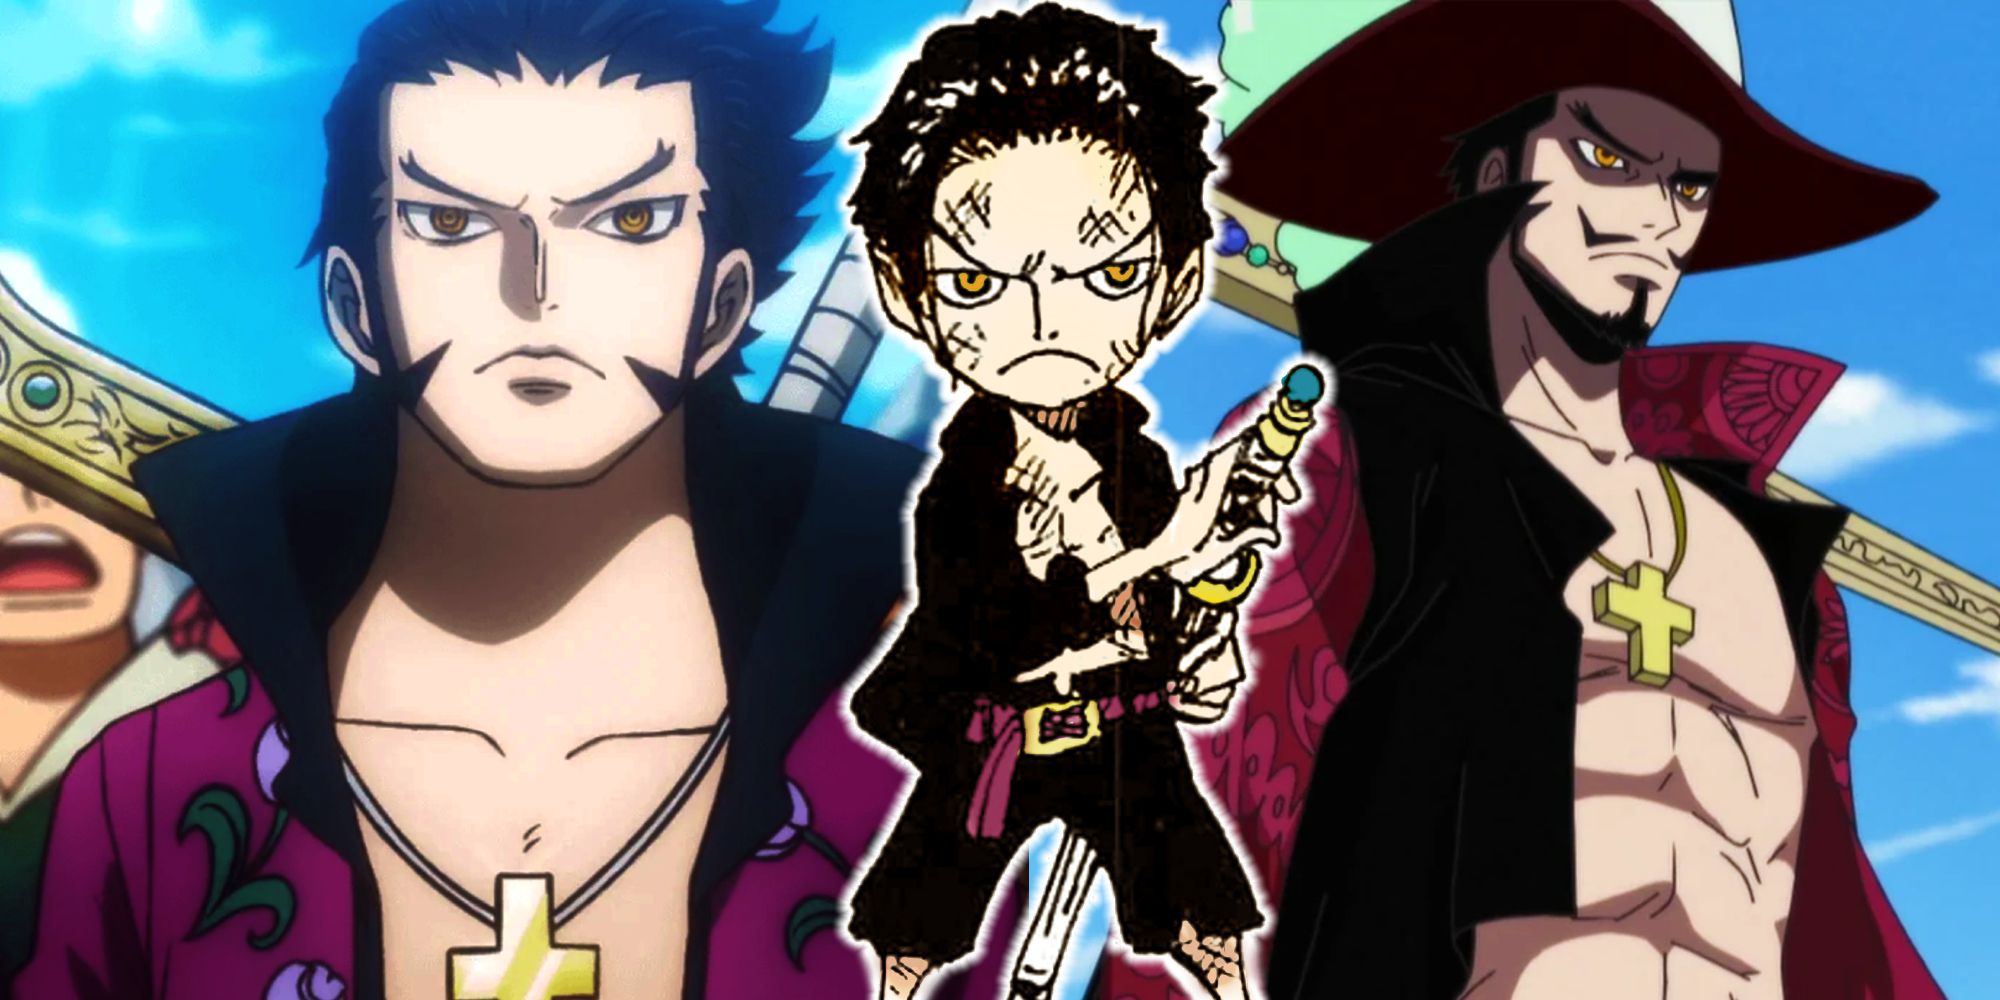 Young Mihawk in One Piece unsheathing his sword in the center with a slightly older version of Mihawk at Rogers execution on the left and Mihawk as seen in the present staring off in the distance wearing his hat to the right